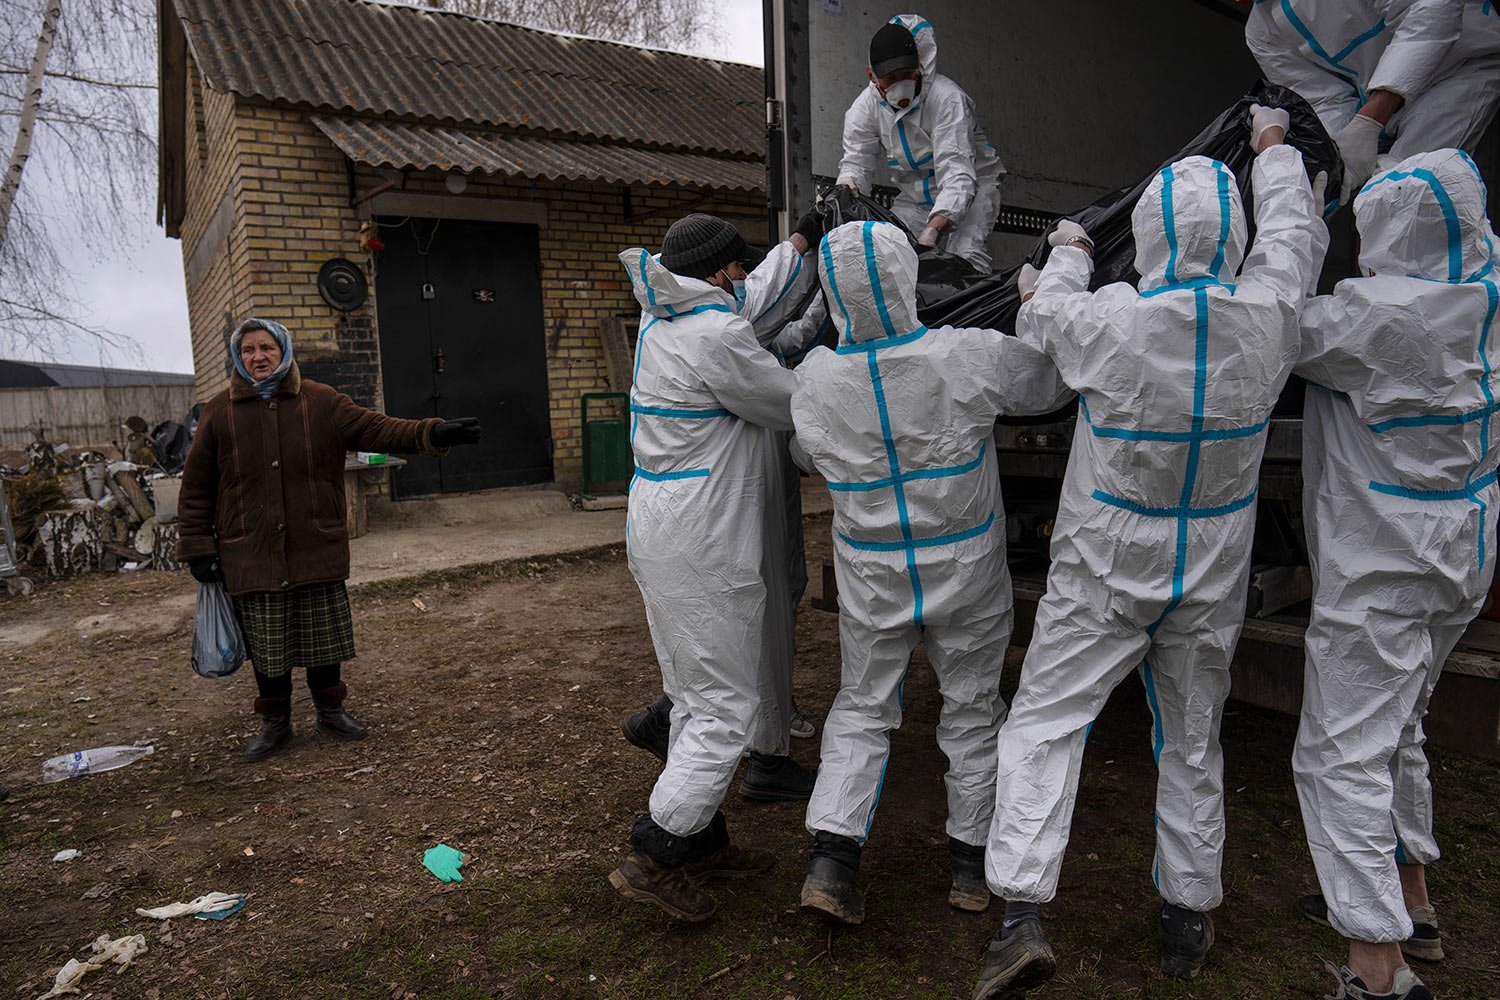  Nadiya Trubchaninova, 70, left, stands next to volunteers while loading a plastic bag that contains the body of a civilian killed by Russian soldiers into a truck, in Bucha, on the outskirts of Kyiv, Ukraine, Tuesday, April 12, 2022. (AP Photo/Rodri